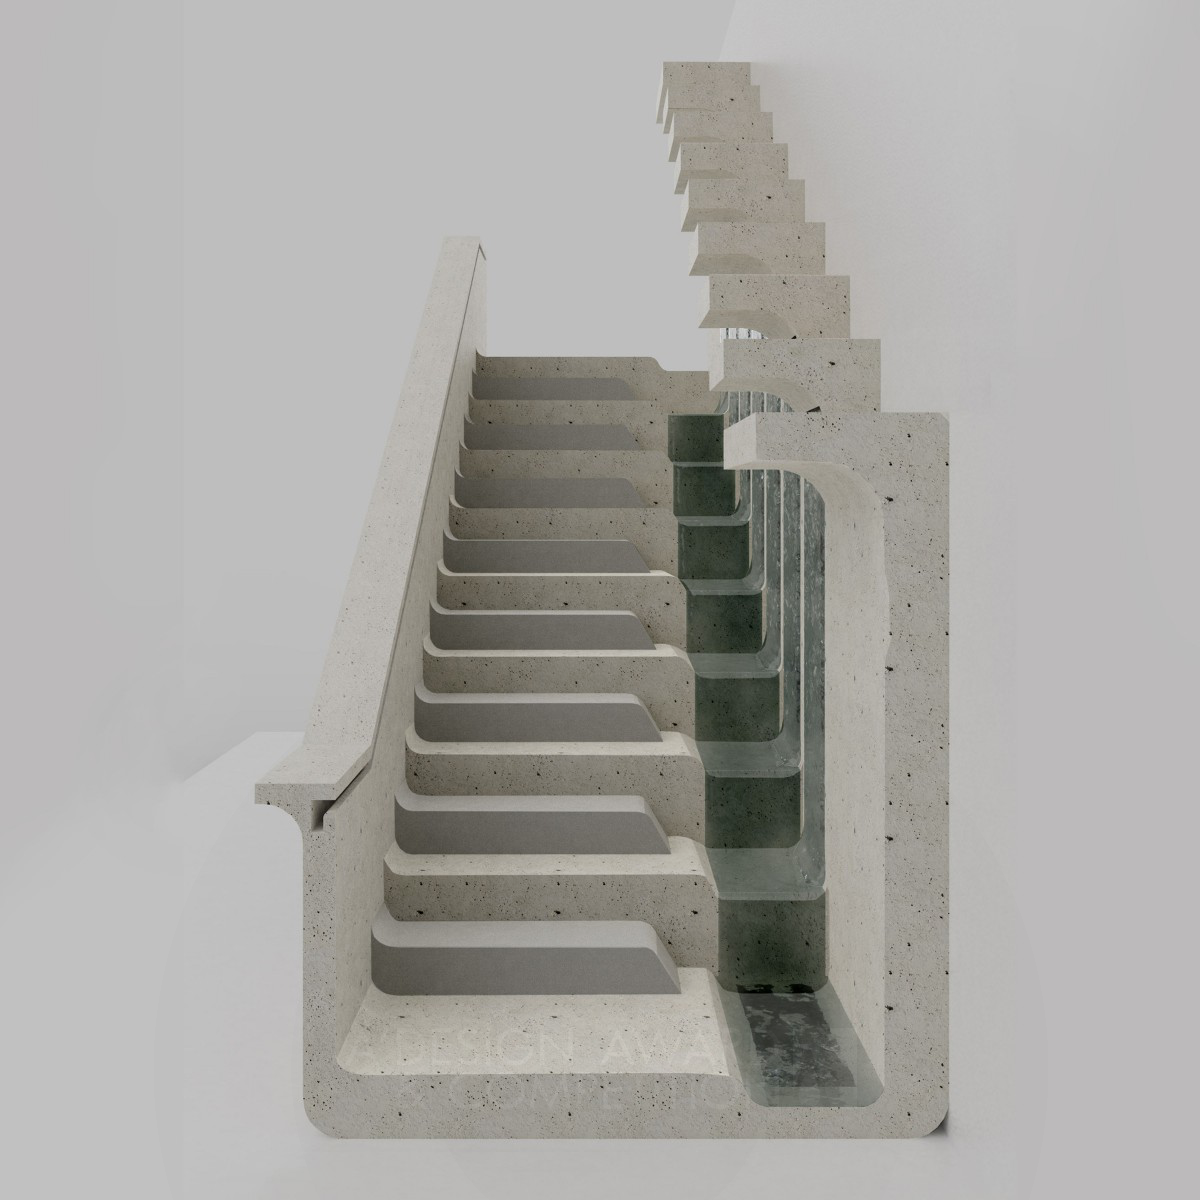 Karst Water Filtration Staircase